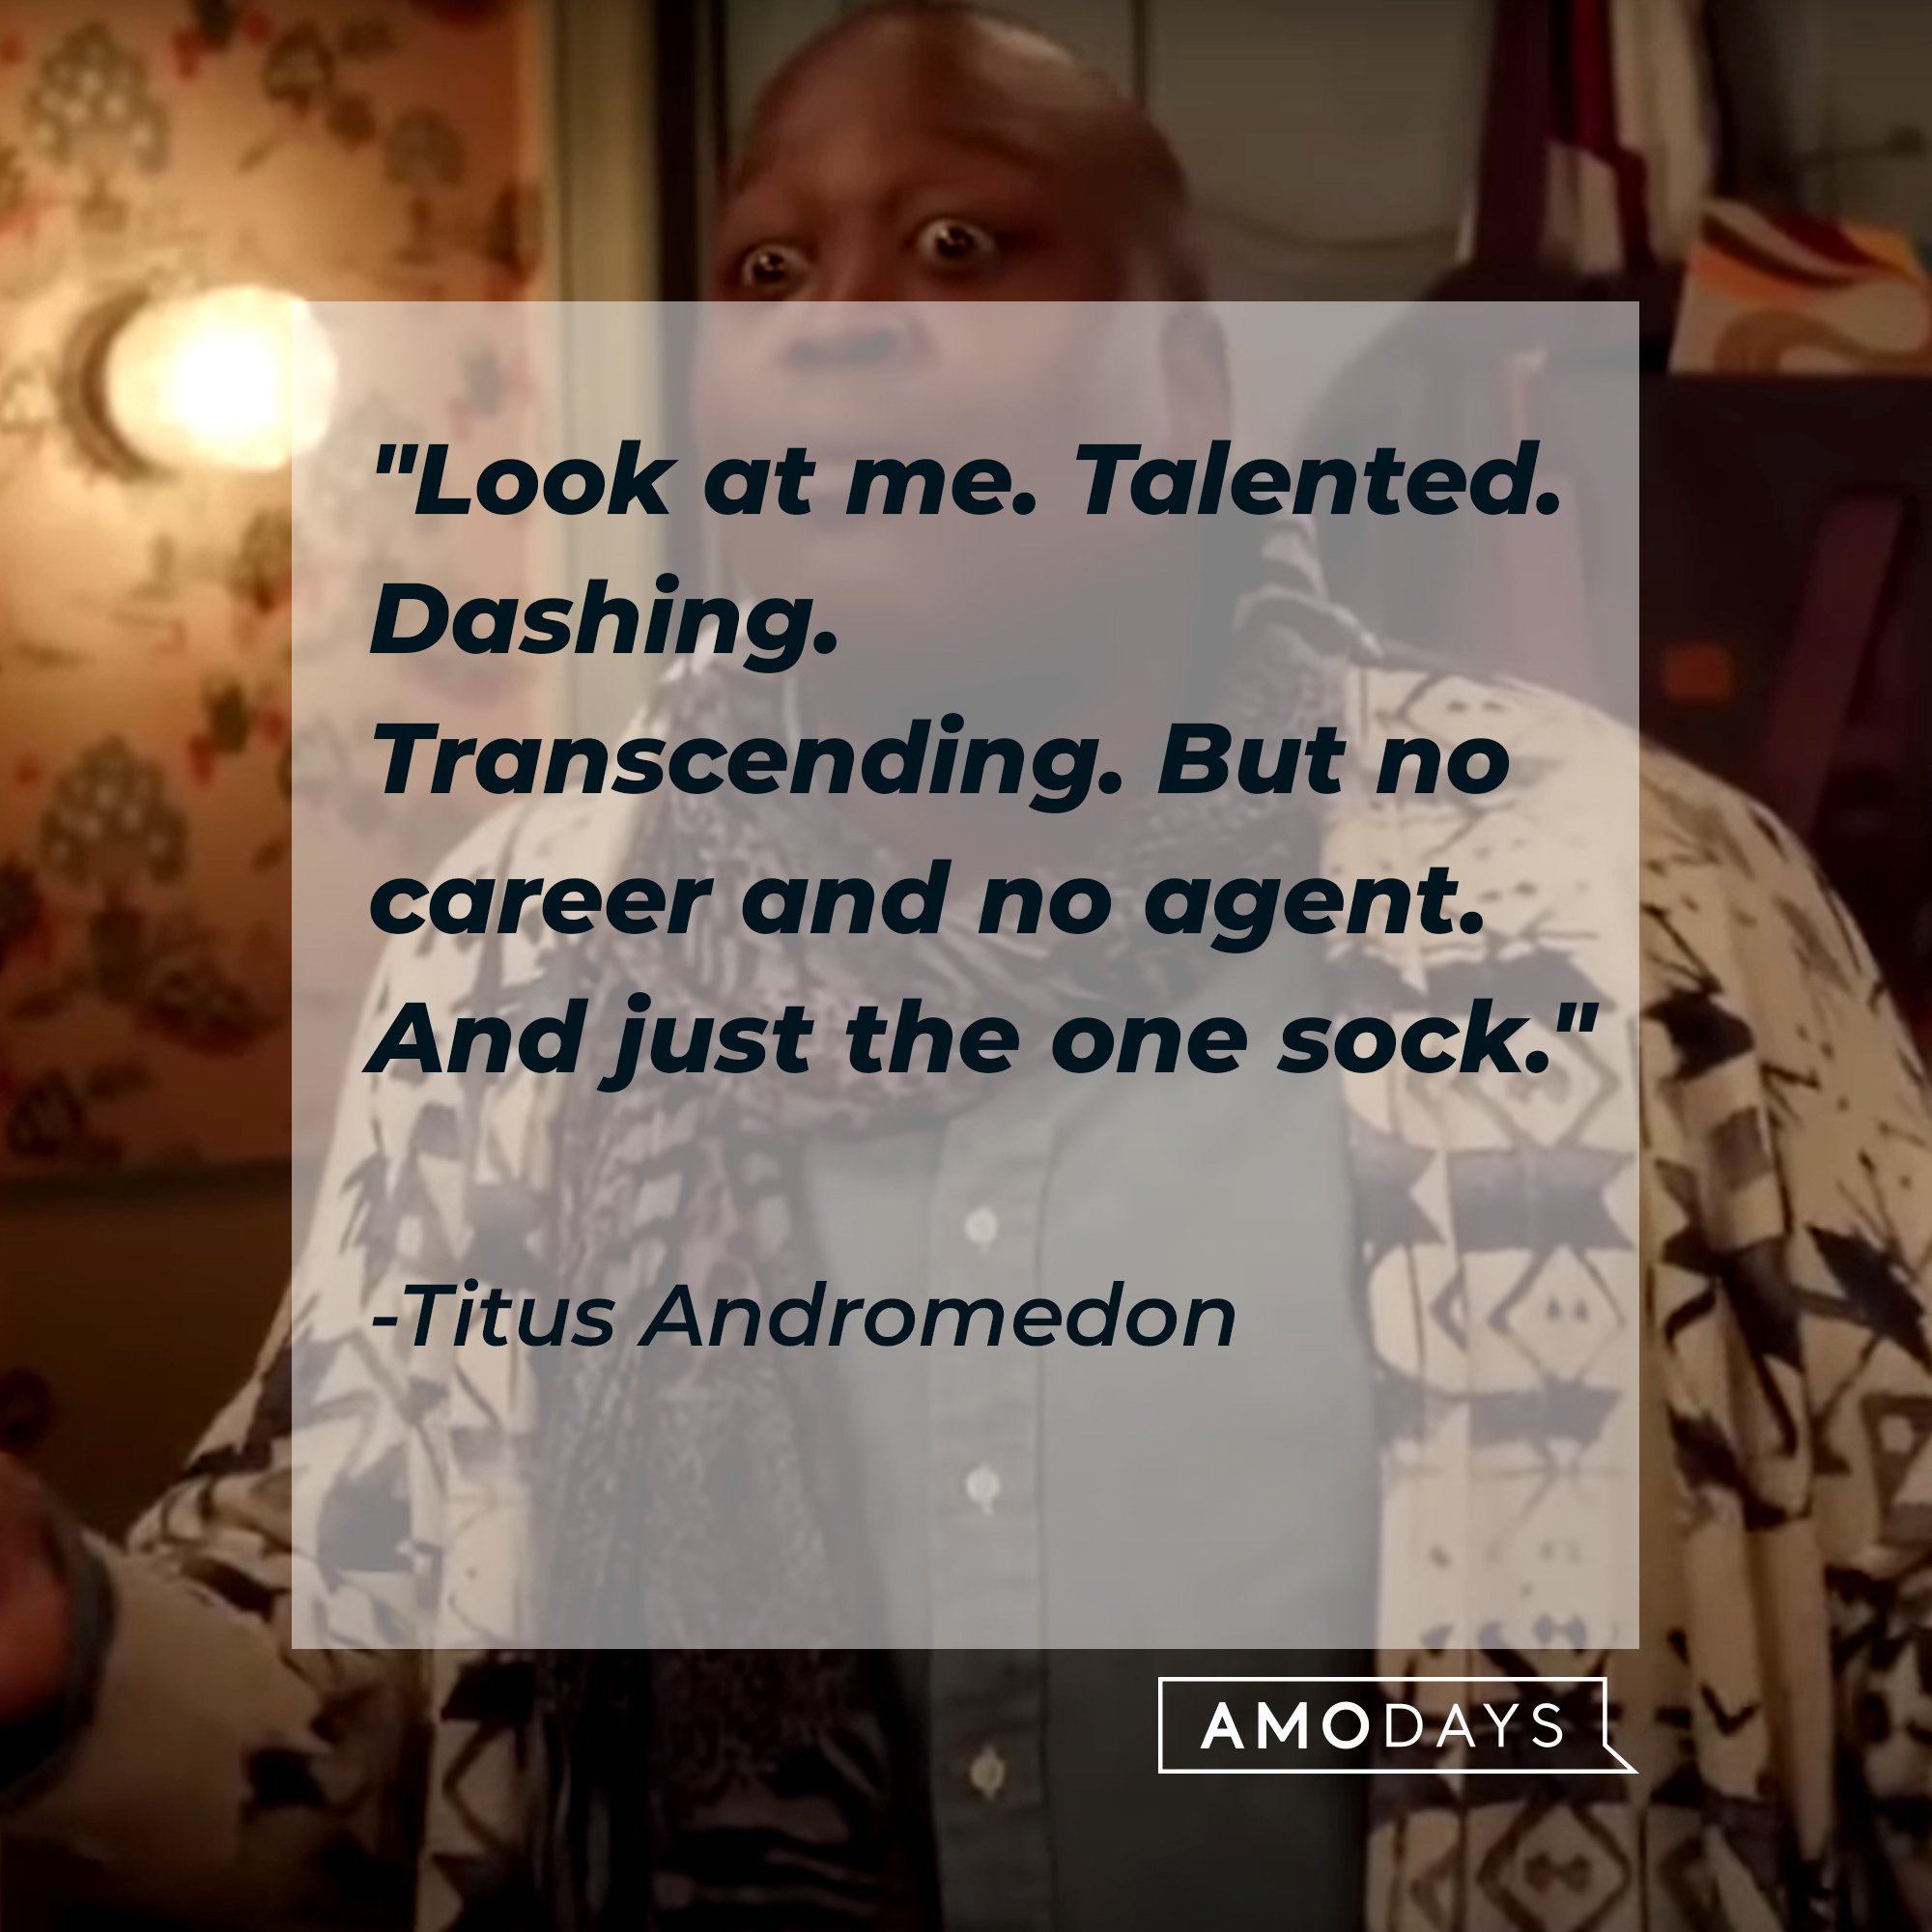 A photo of Titus Andromedon with the quote, "Look at me. Talented. Dashing. Transcending. But no career and no agent. And just the one sock." | Source: YouTube/Netflix